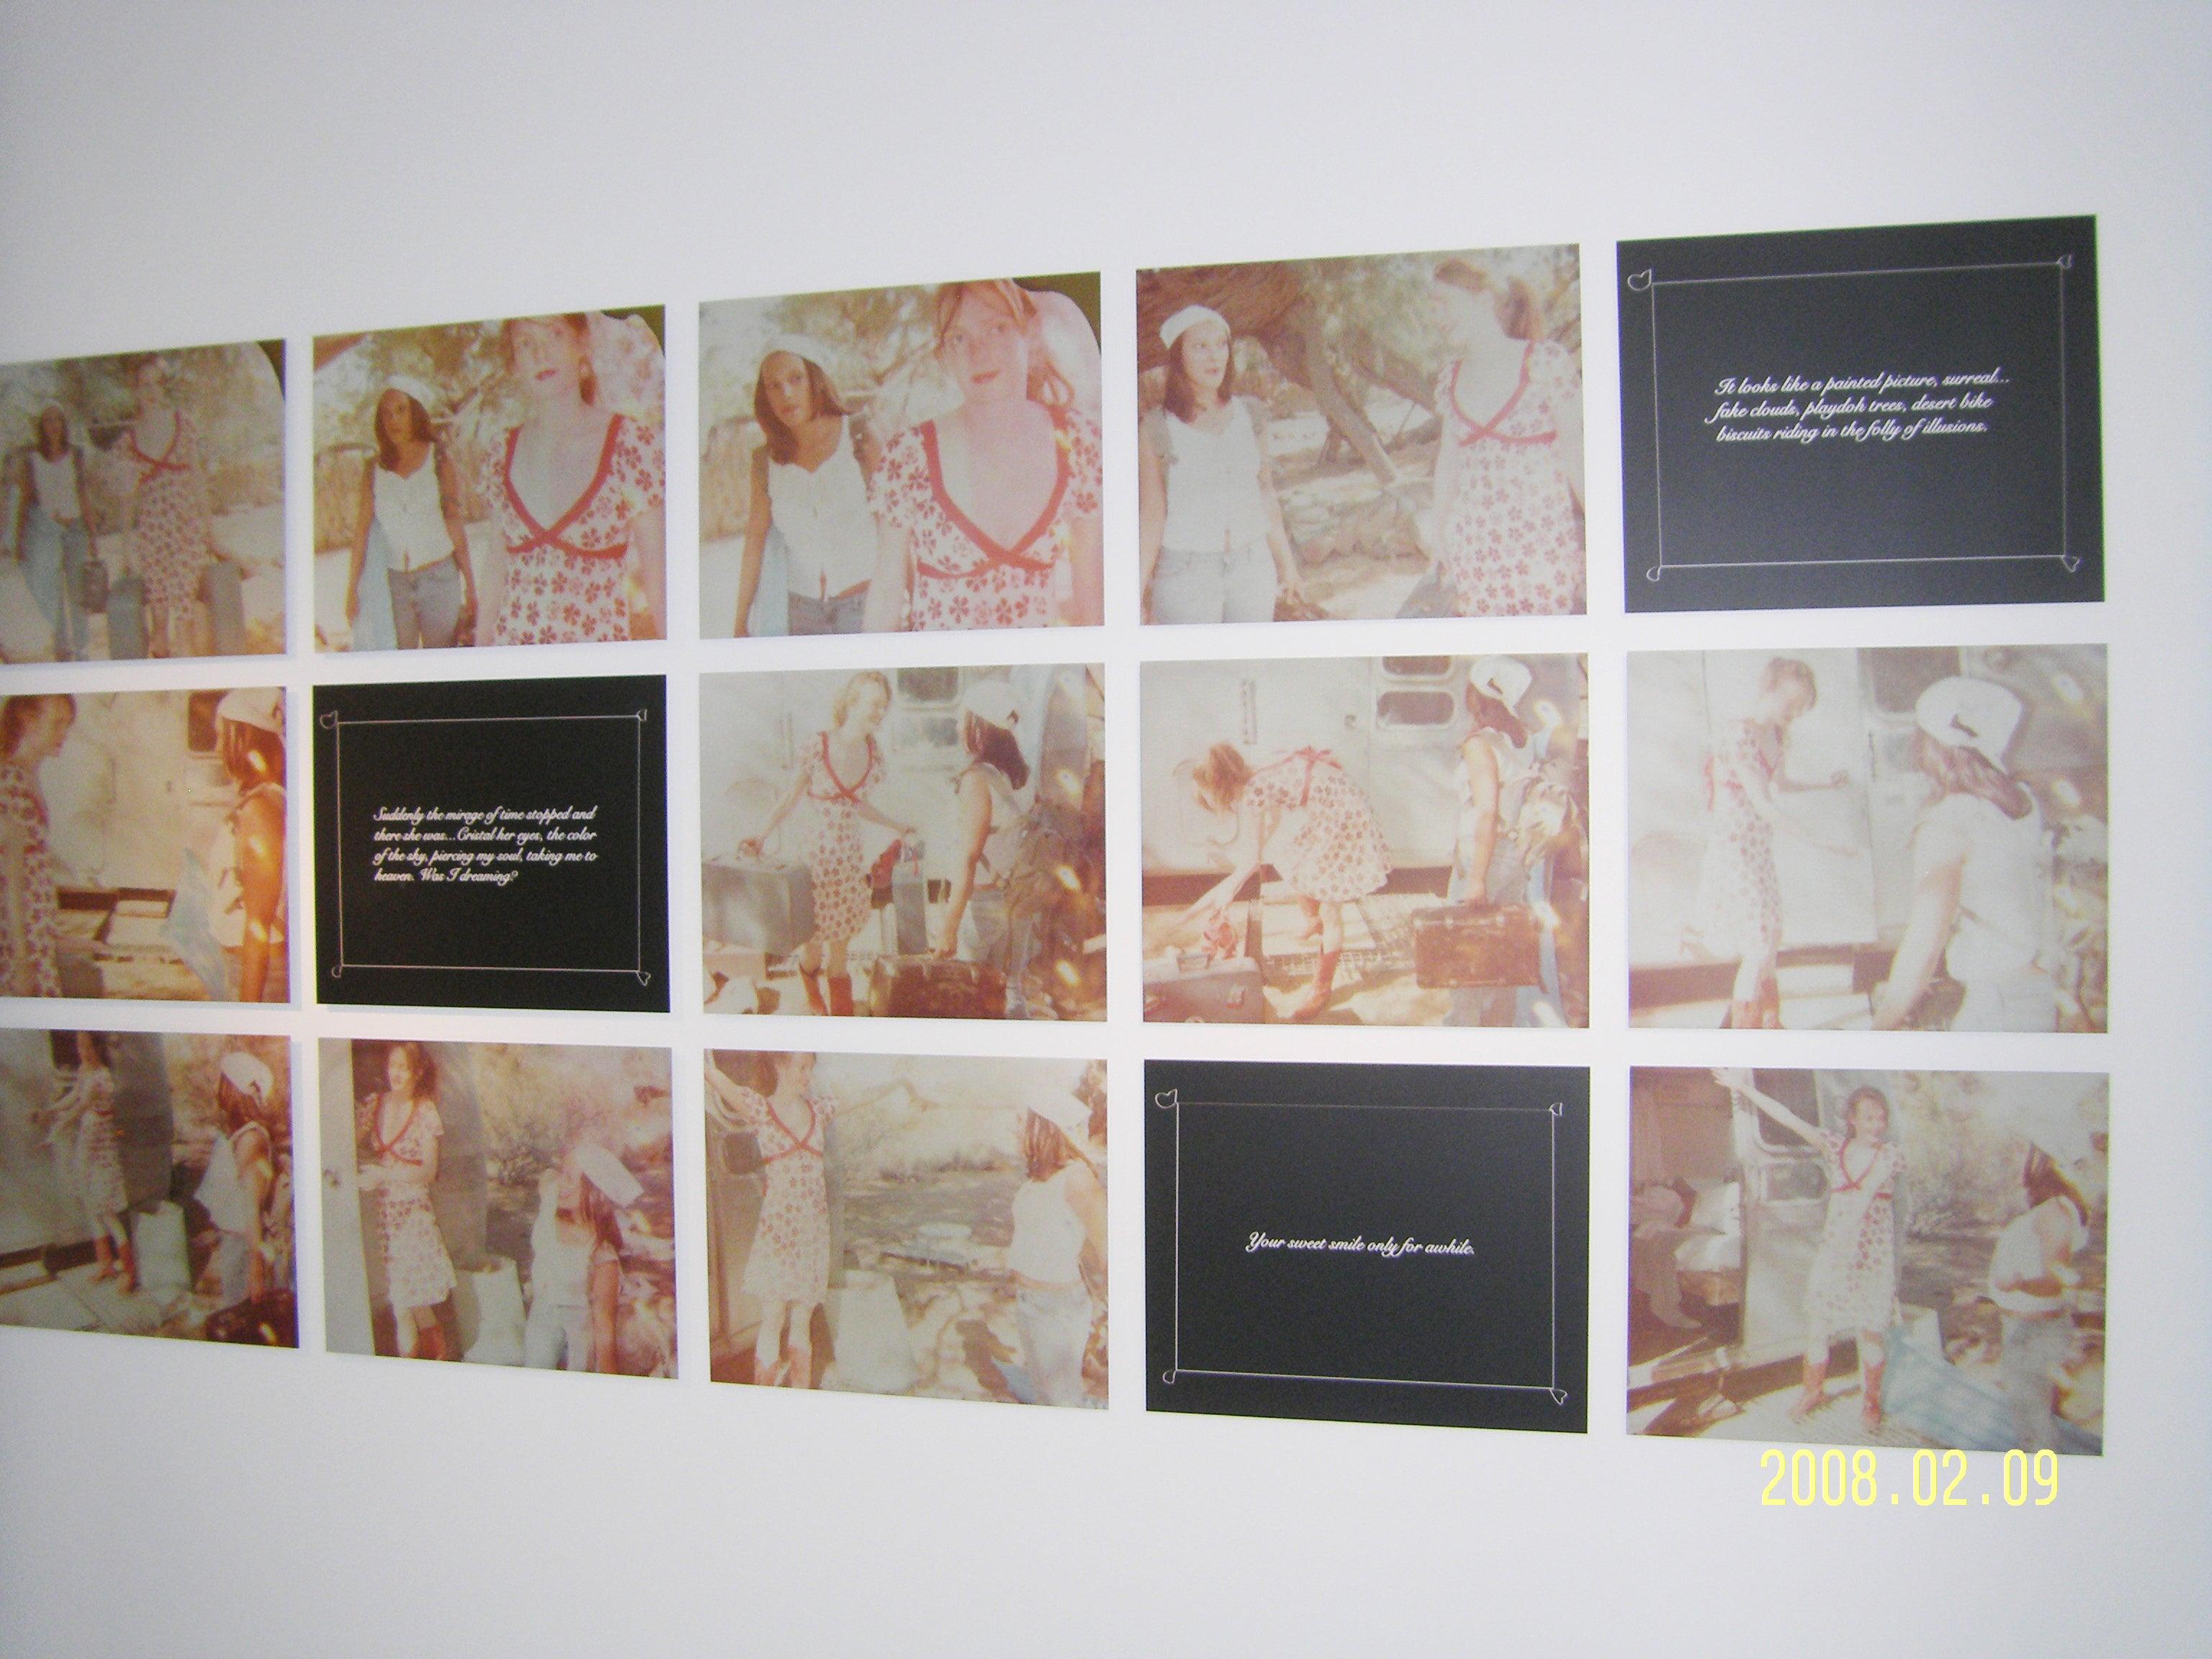 Moving in Together (Till Death do us Part) - analog, mounted, Installation - Contemporary Photograph by Stefanie Schneider